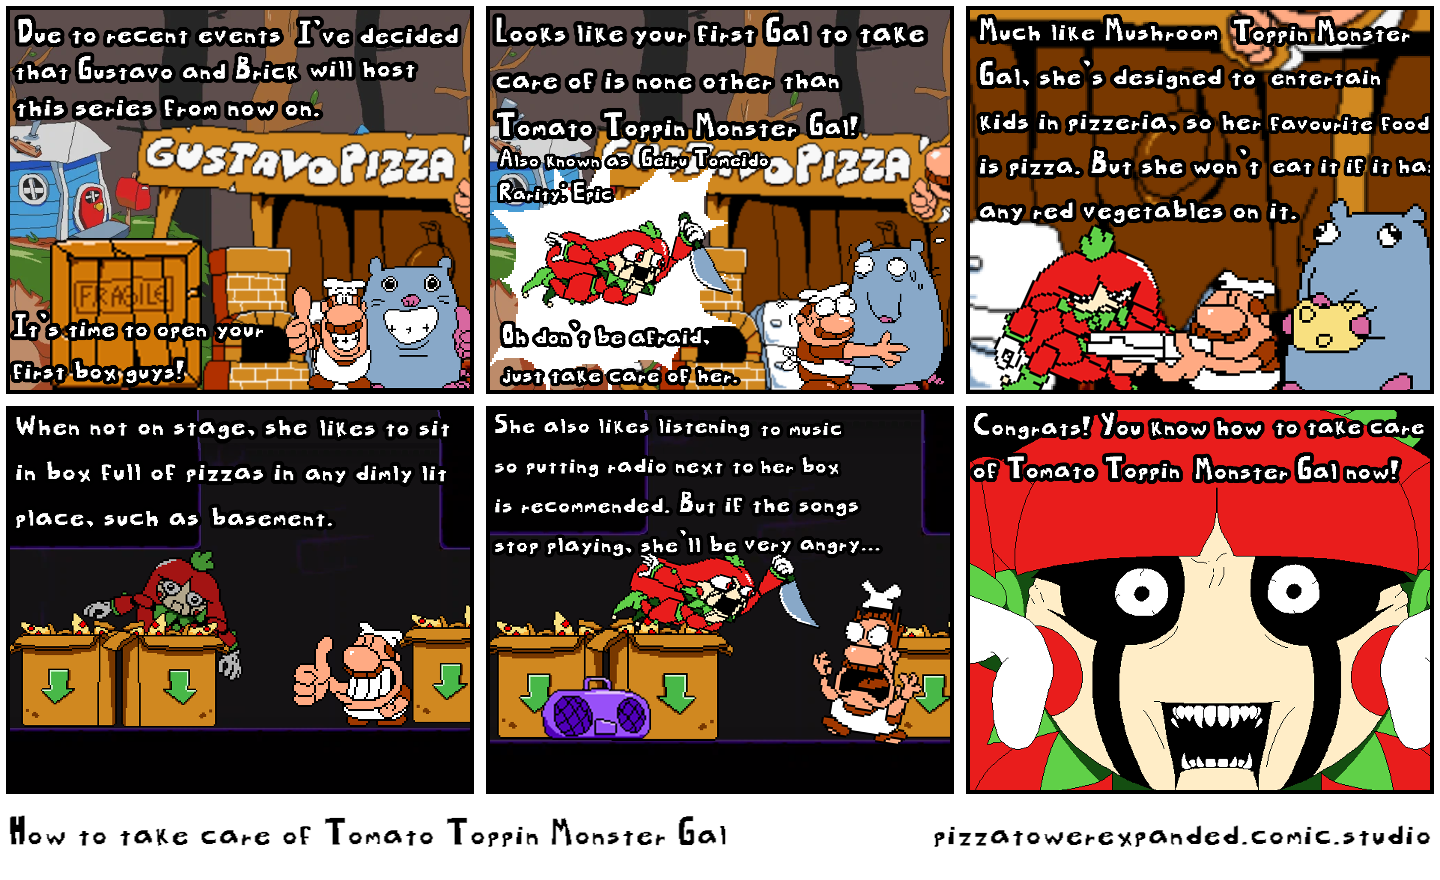 How to take care of Tomato Toppin Monster Gal